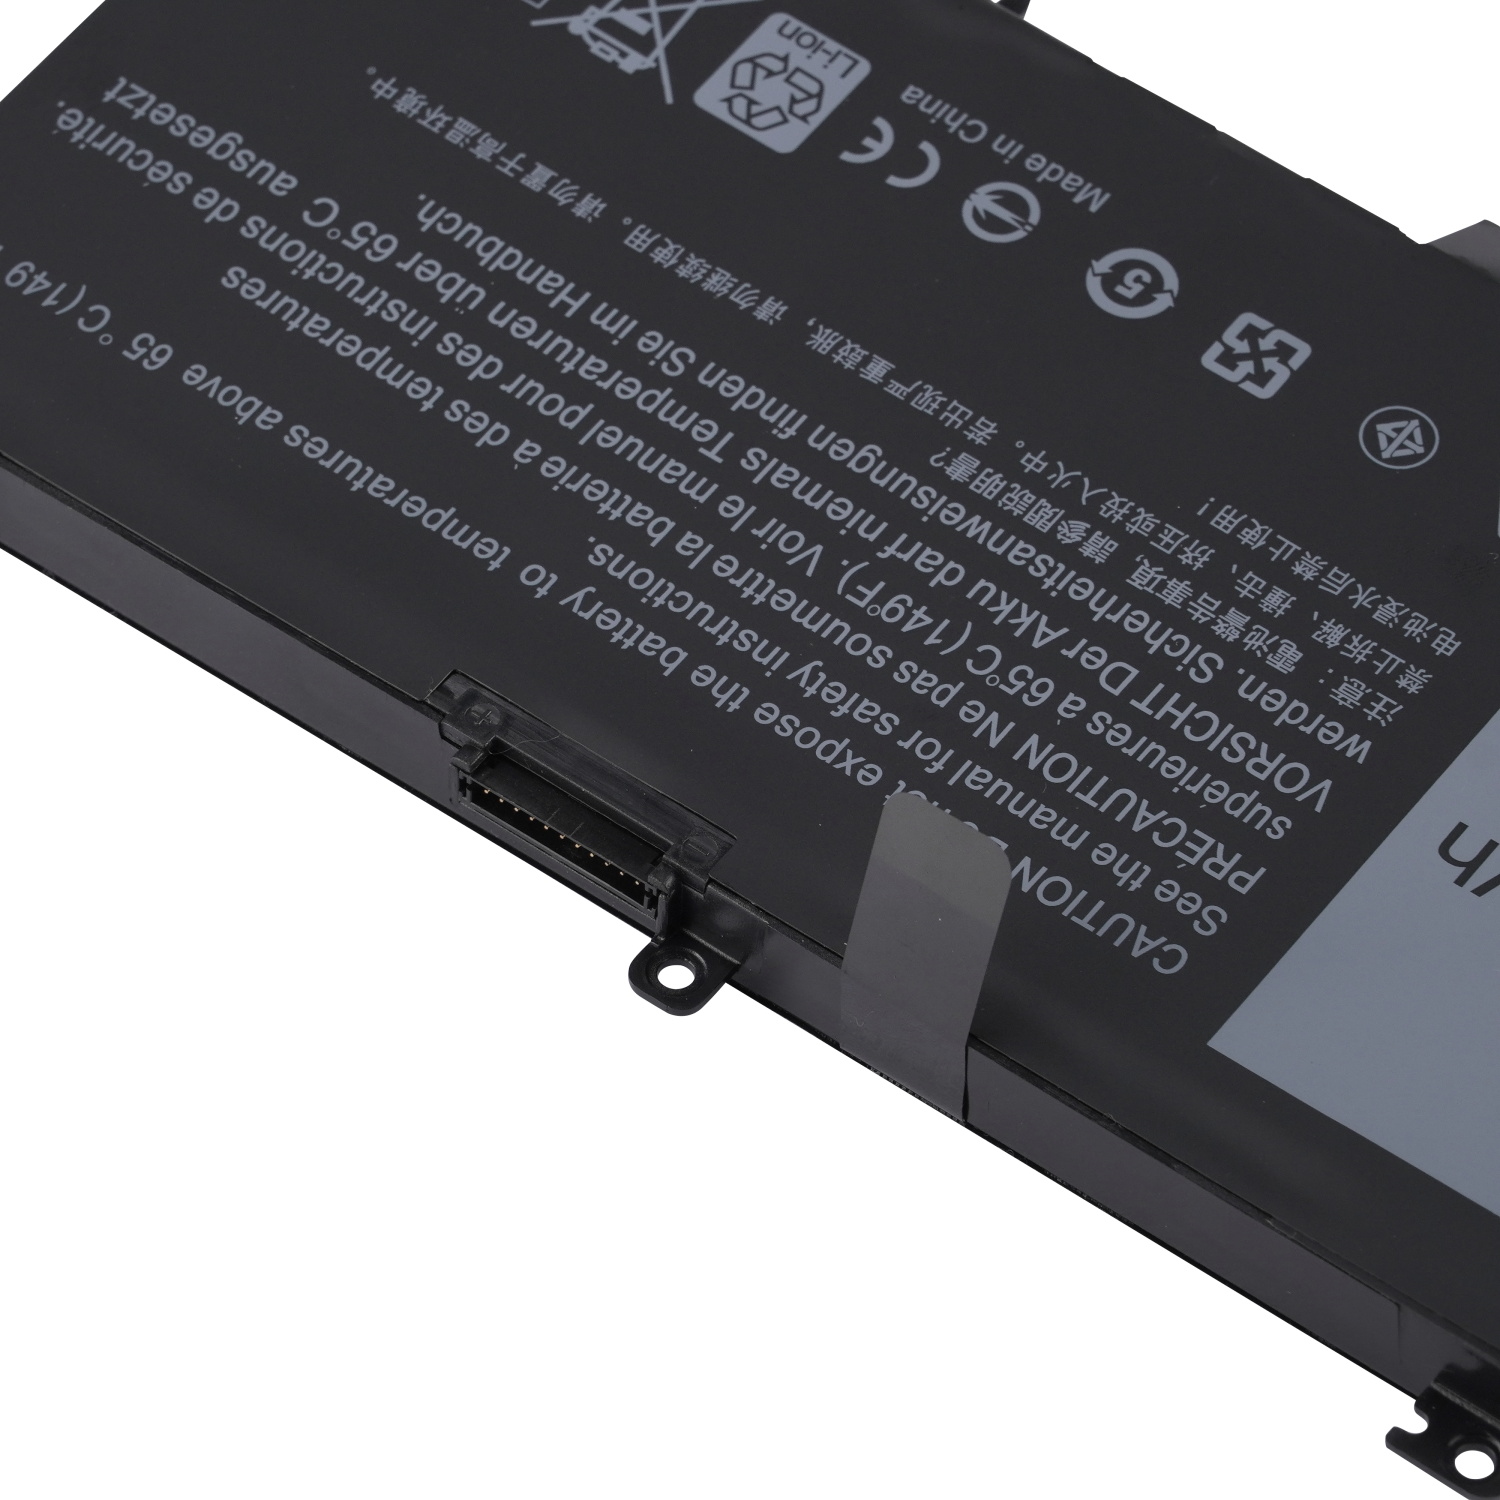 357F9 11.1V 74Wh Replacement Laptop Battery for Dell Laptop Inspiron 15 7000 7557 7559 7566 7567 5576 5577 INS15PD Series Notebook